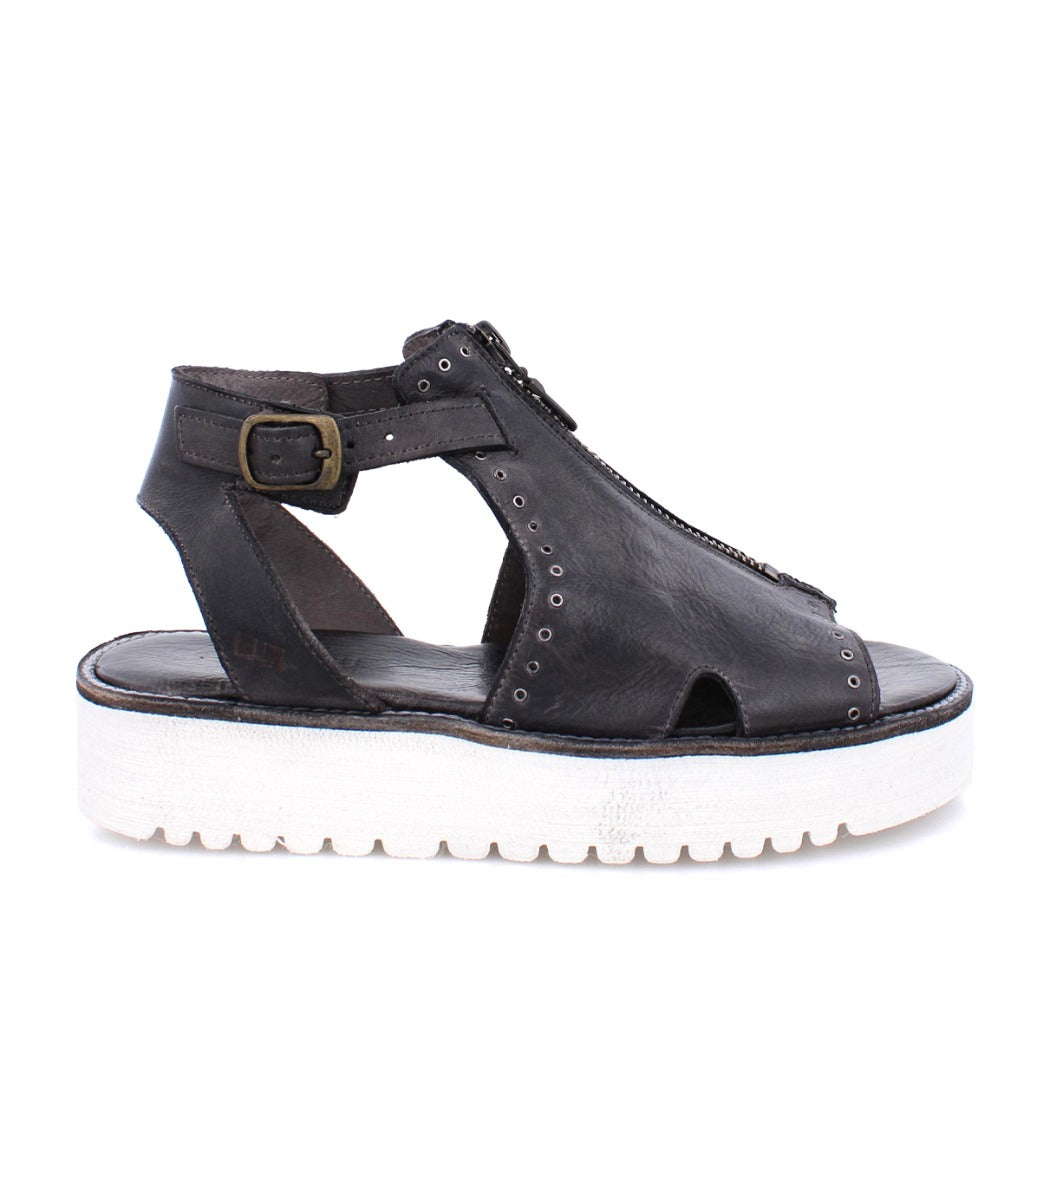 A Clancy sandal by Bed Stu, made of black leather with a white sole.